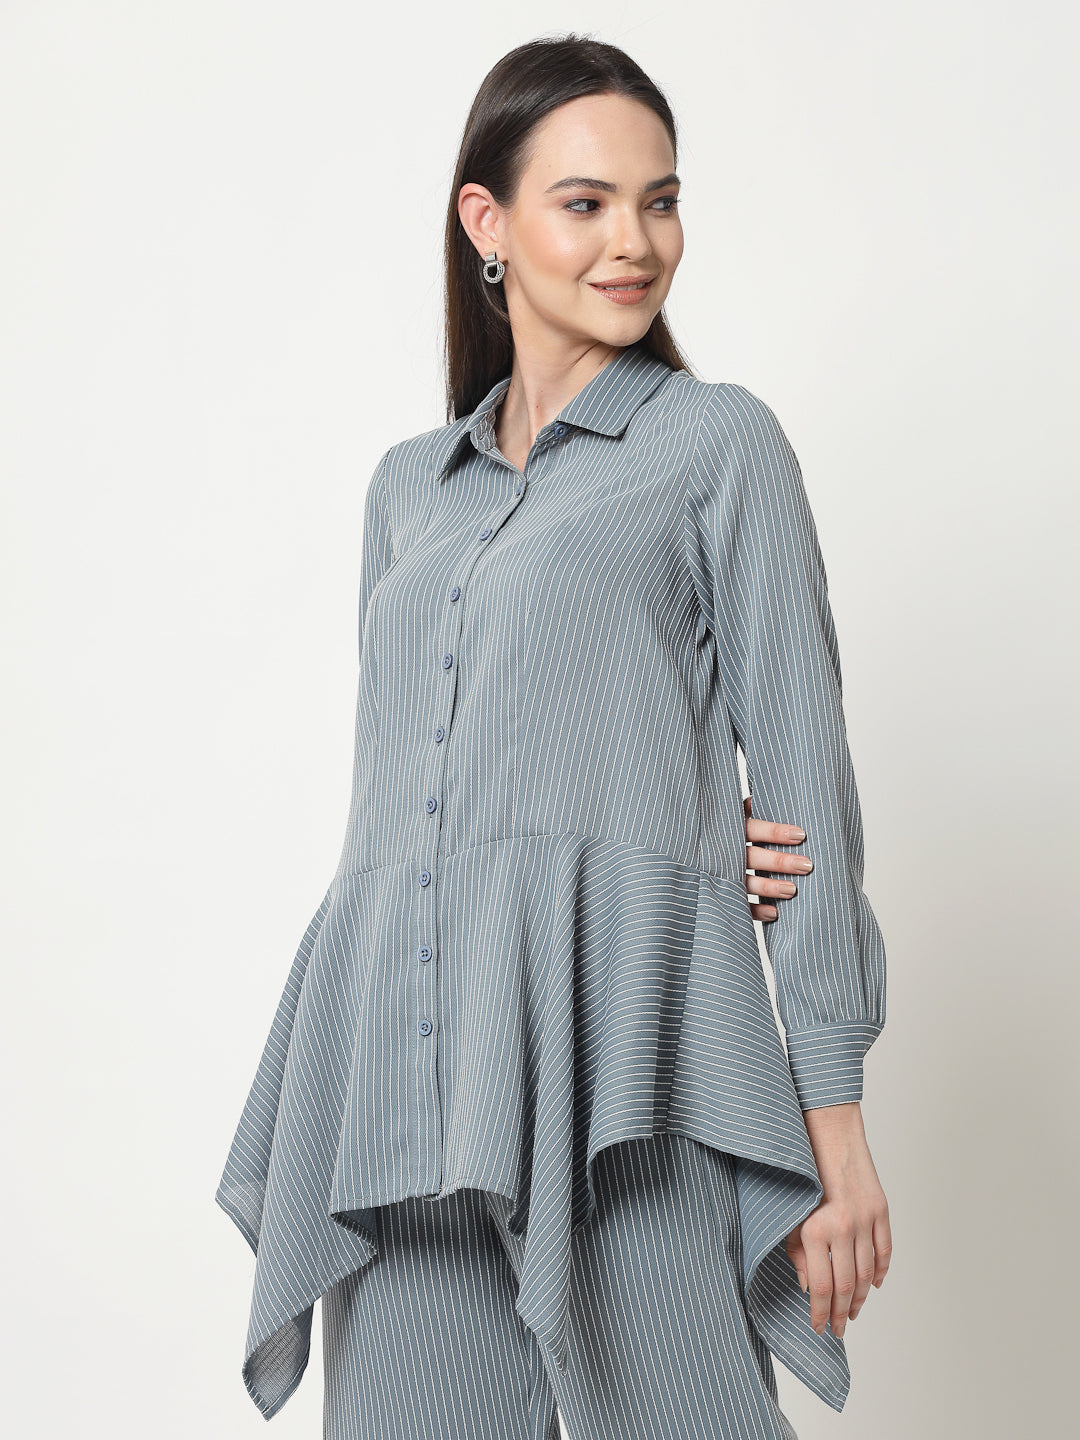 Blue Asymmetrical Shirt With White Lines